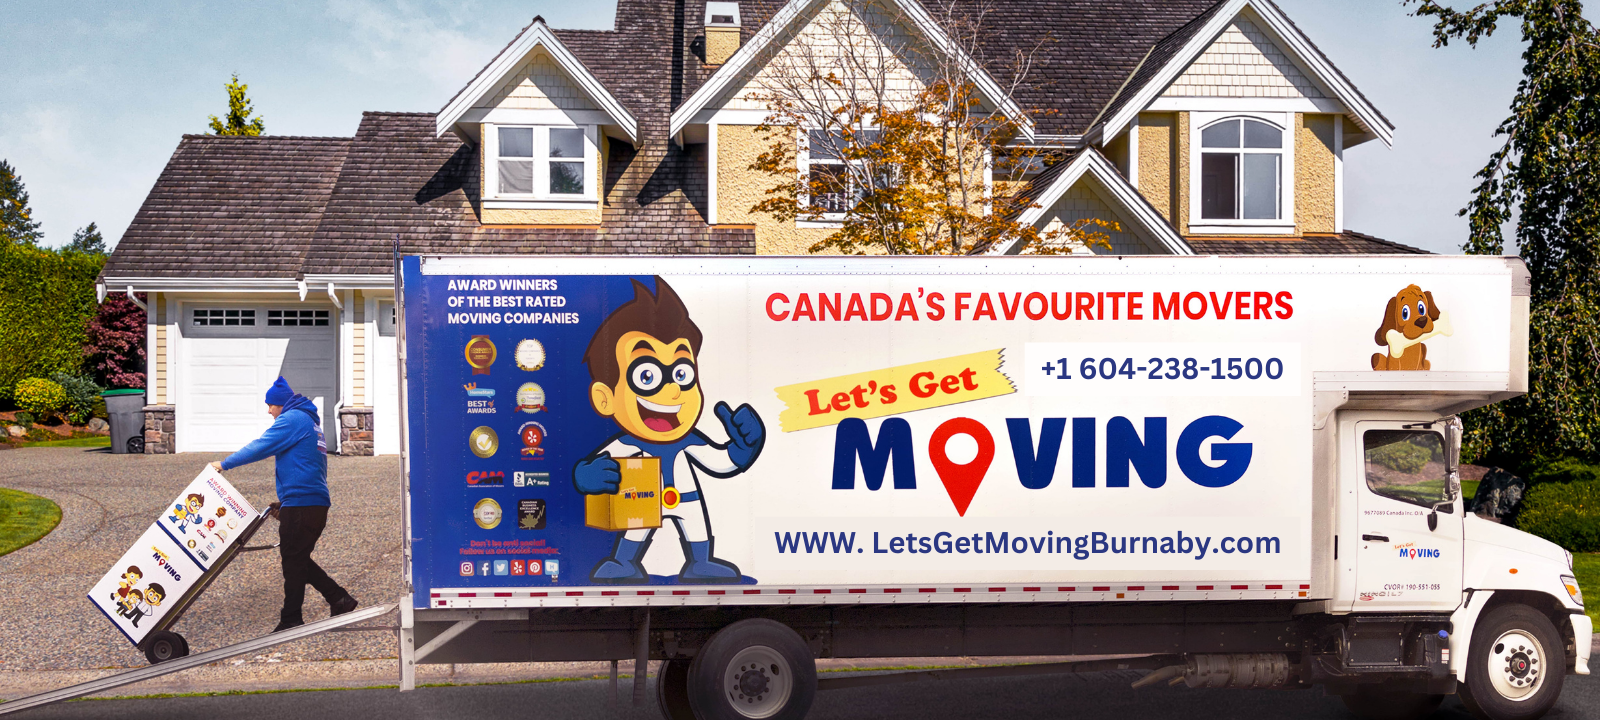 Let's Get Moving - Burnaby Movers